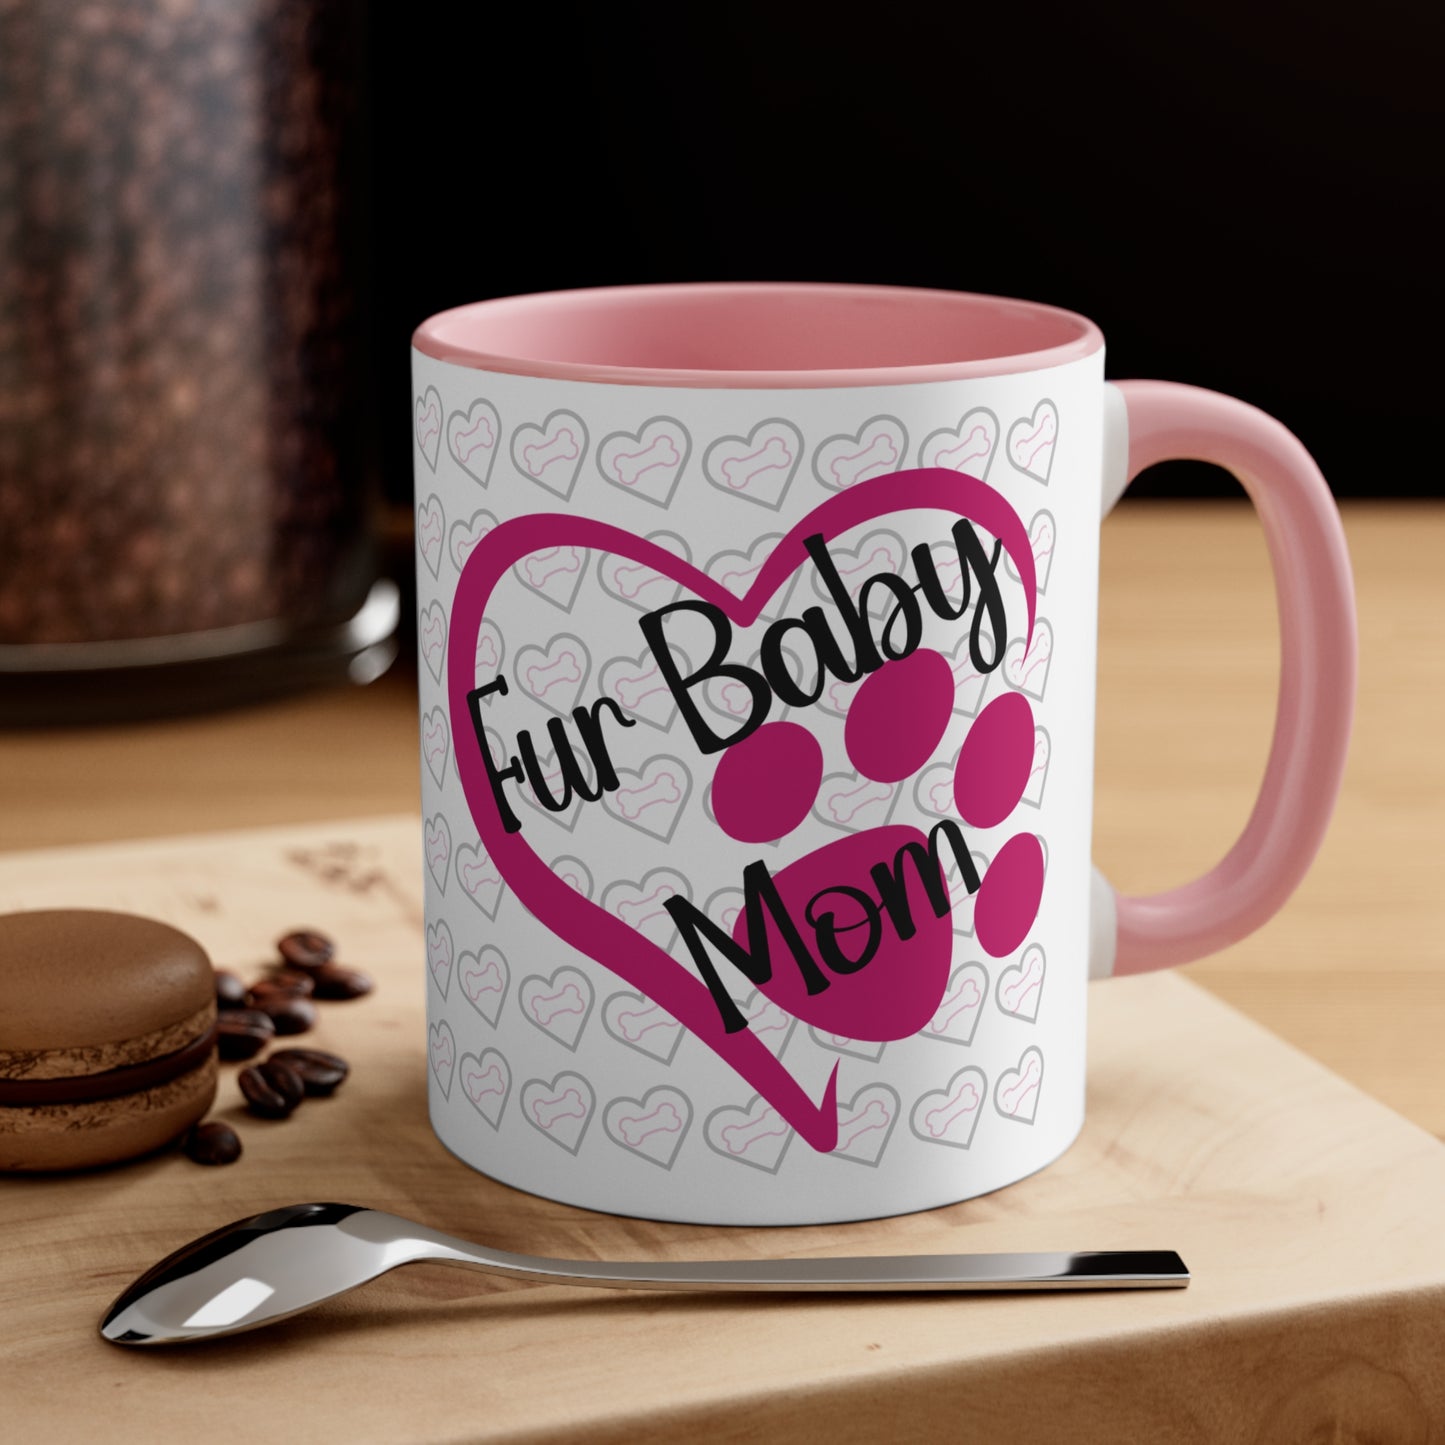 Fur baby mom coffee mug with pink heart and paw print 11 oz, front view in pink.